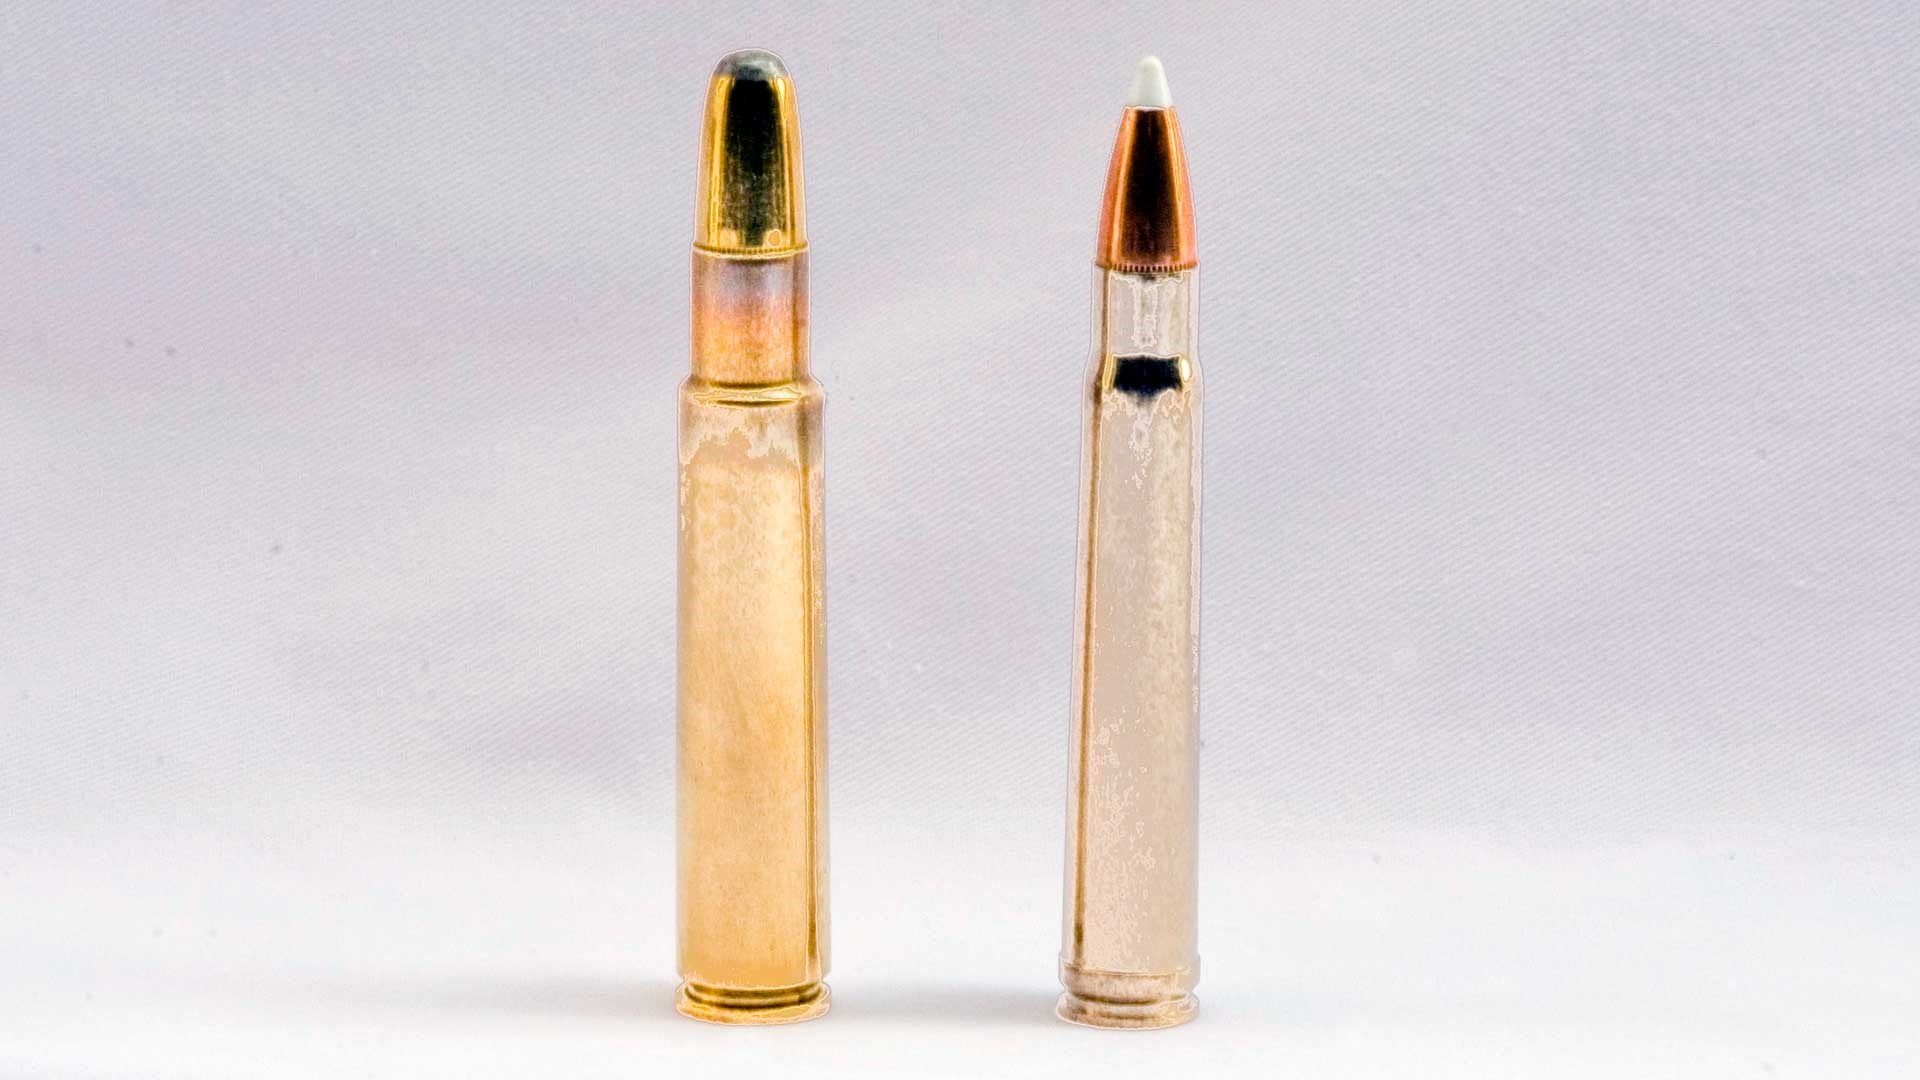 The .416 Rigby, left, is shown next to a .375 Holland & Holland cartridge.